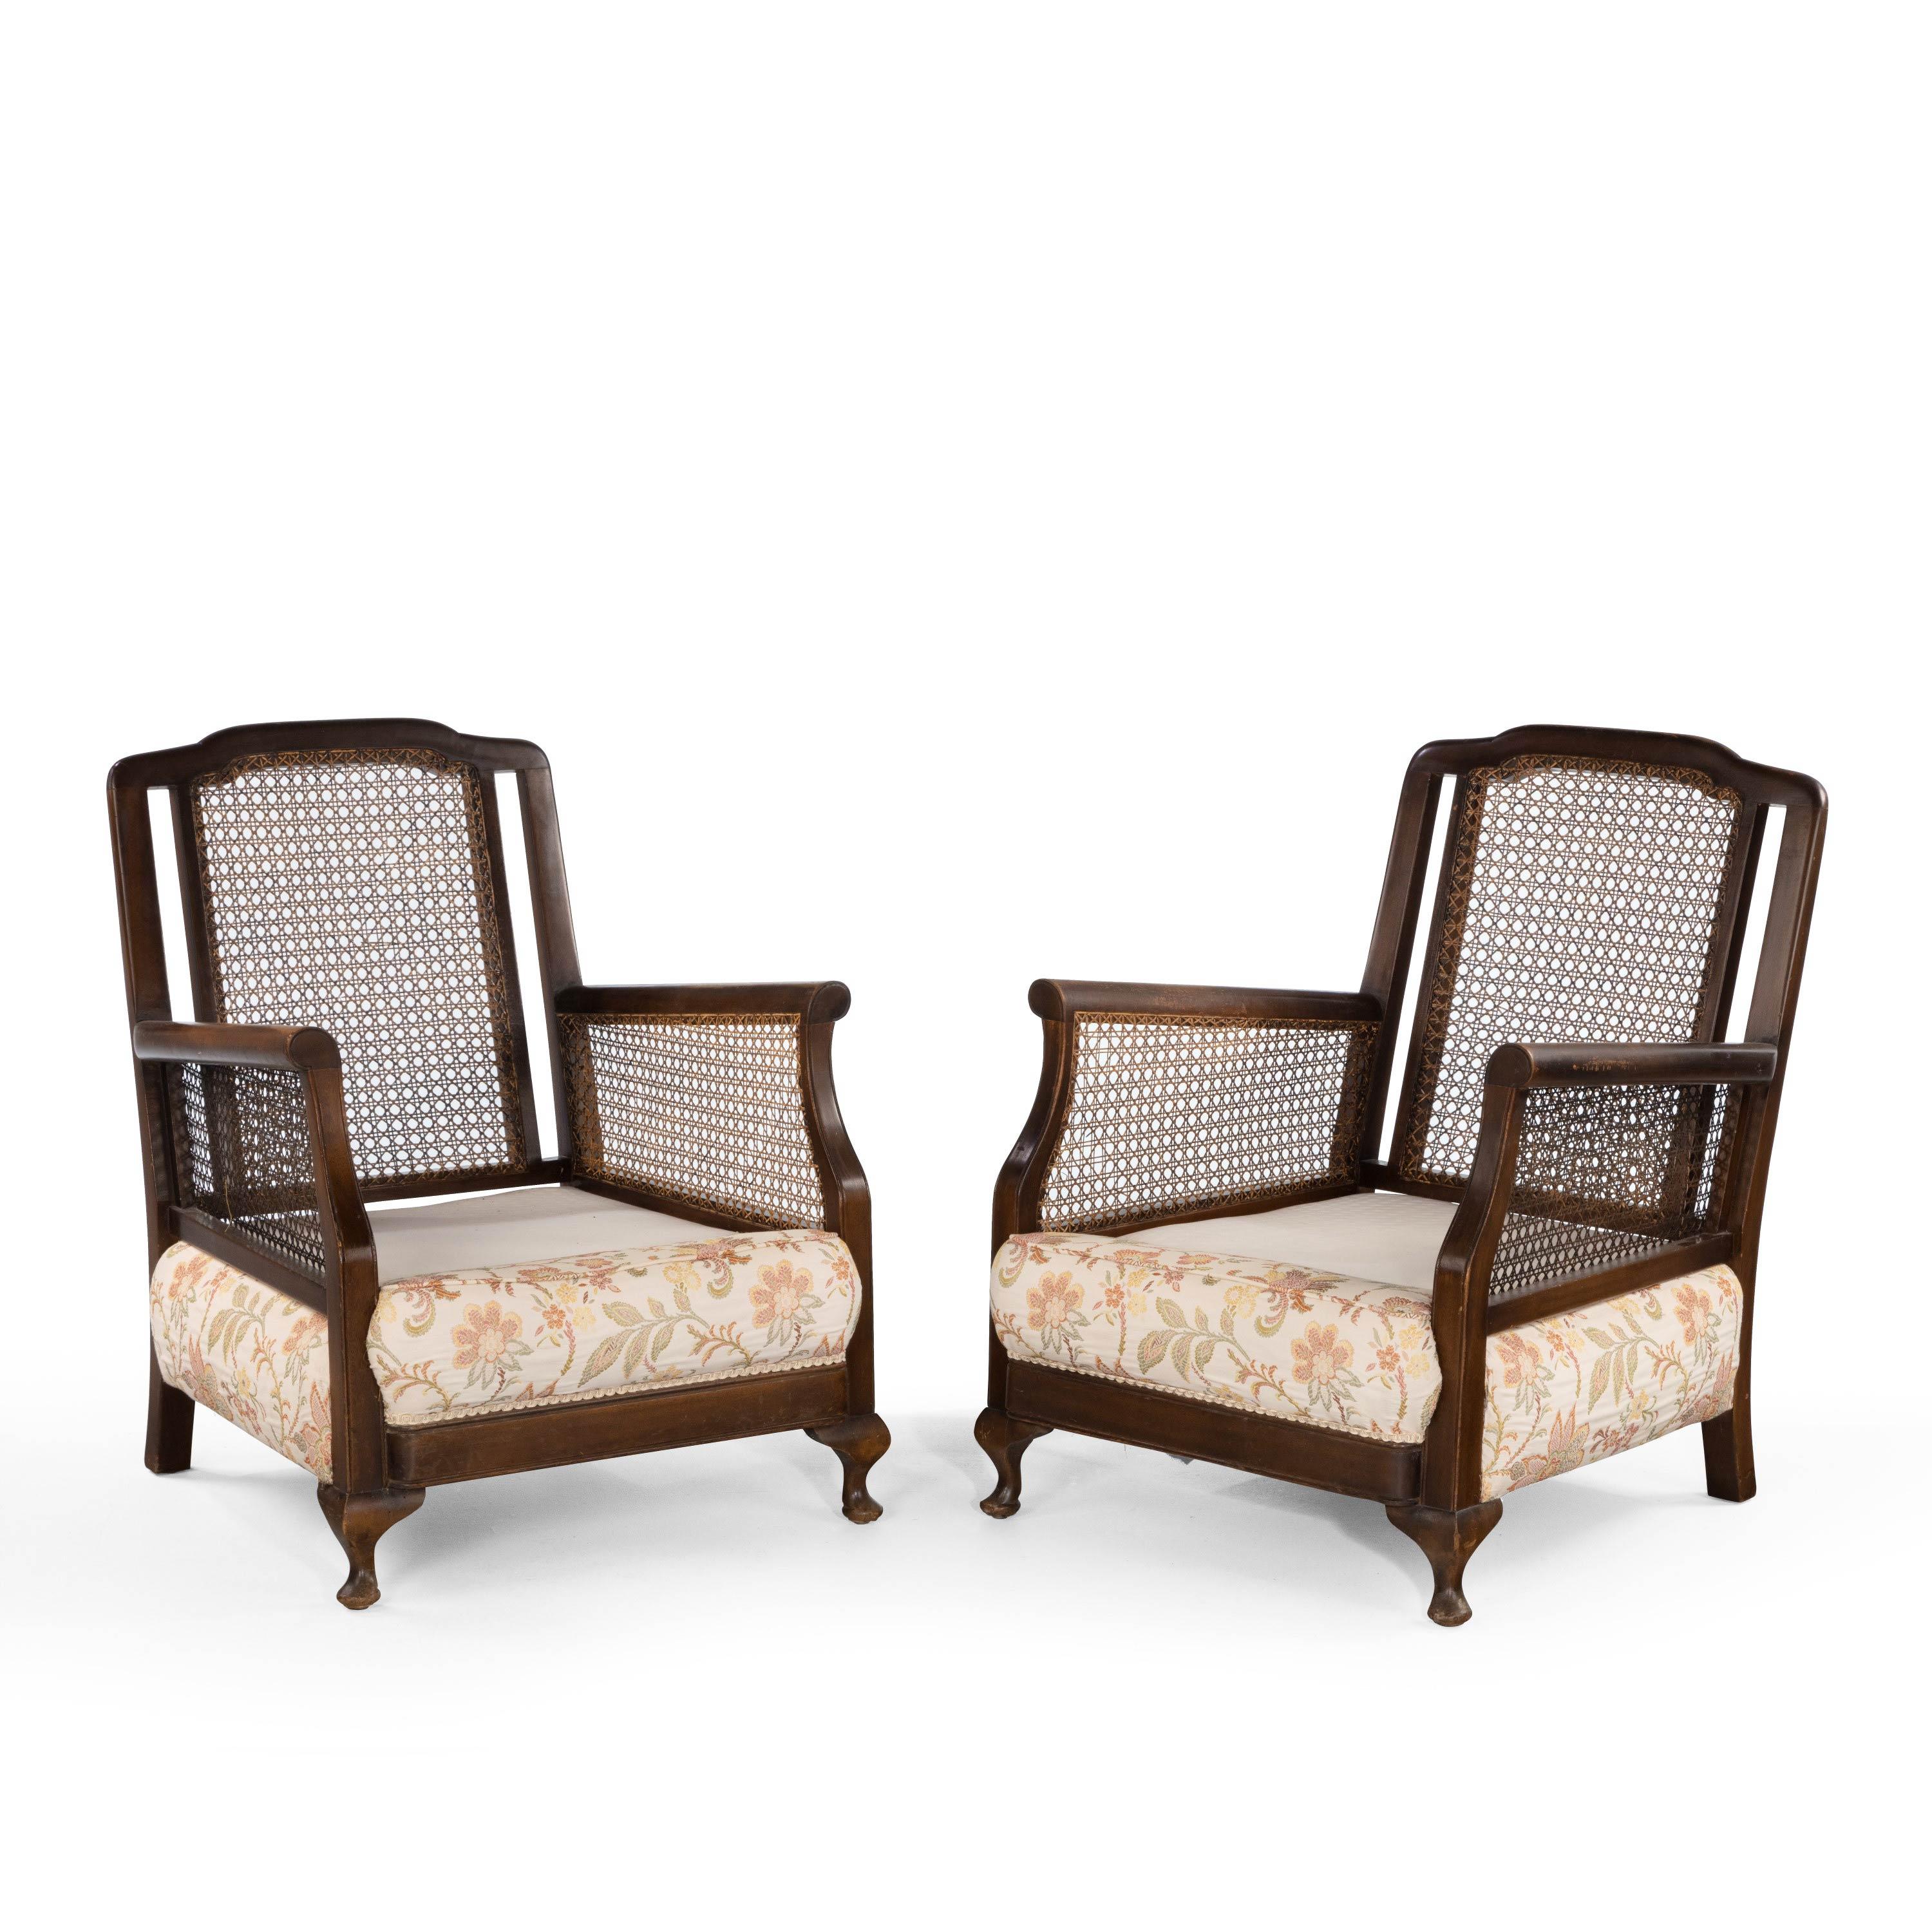 Attractive Late 20th Century Pair of Mahogany and Canework Chairs In Good Condition In Peterborough, Northamptonshire